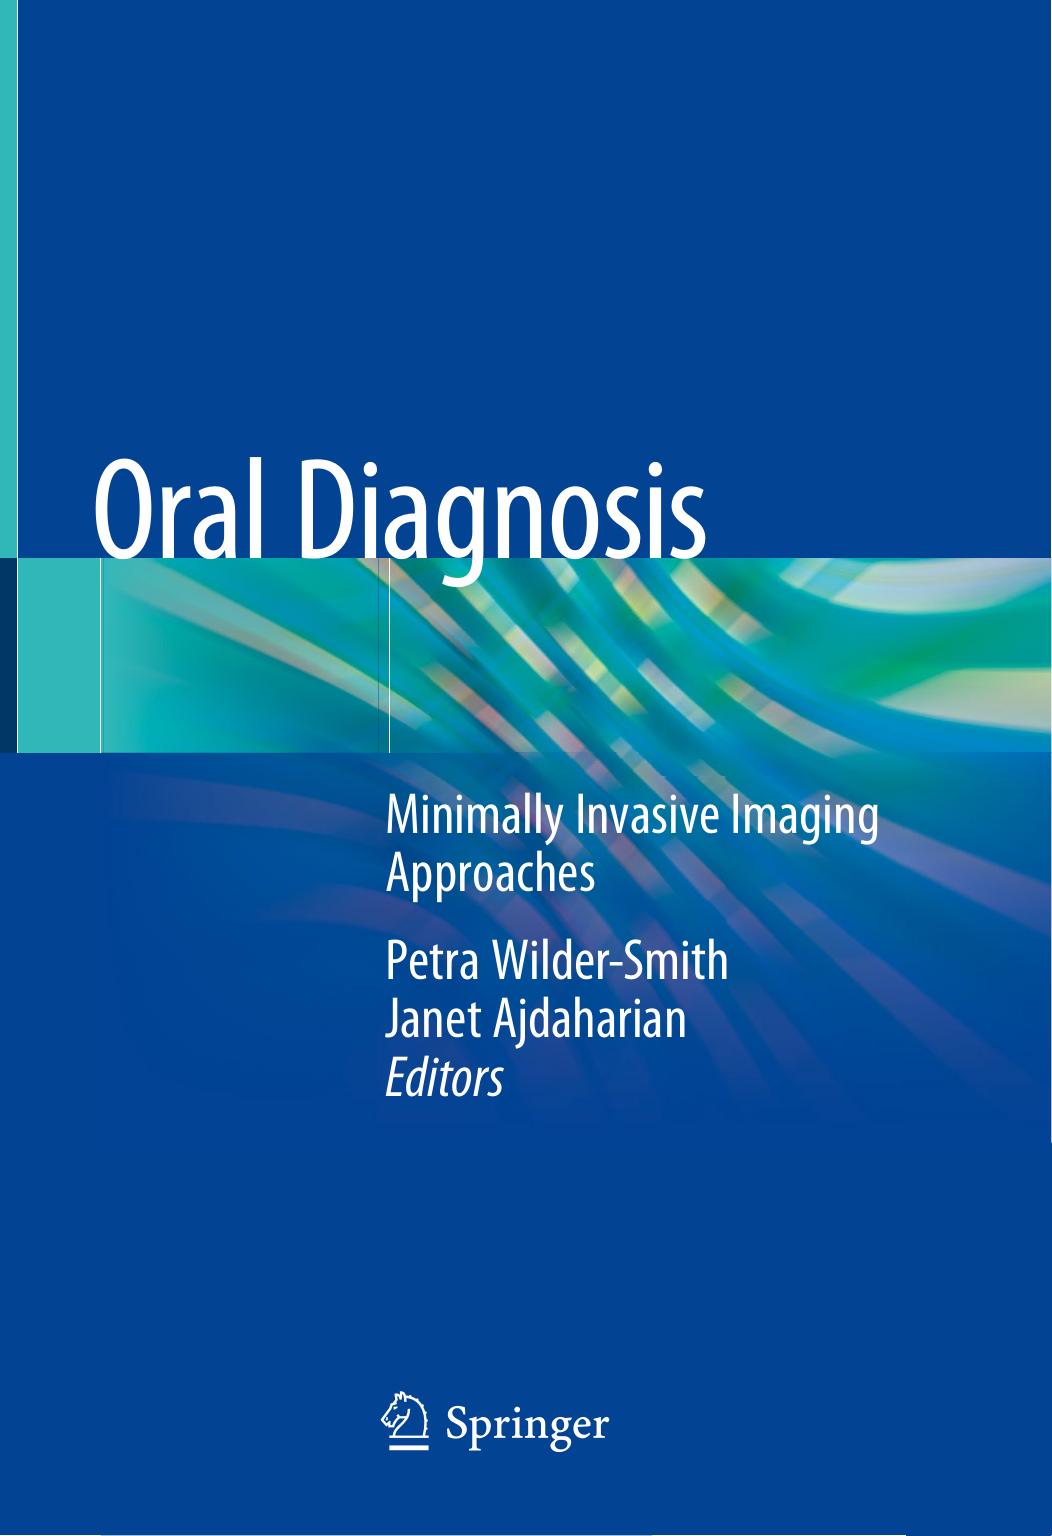 Oral Diagnosis  Minimally Invasive Imaging Approaches (2020)